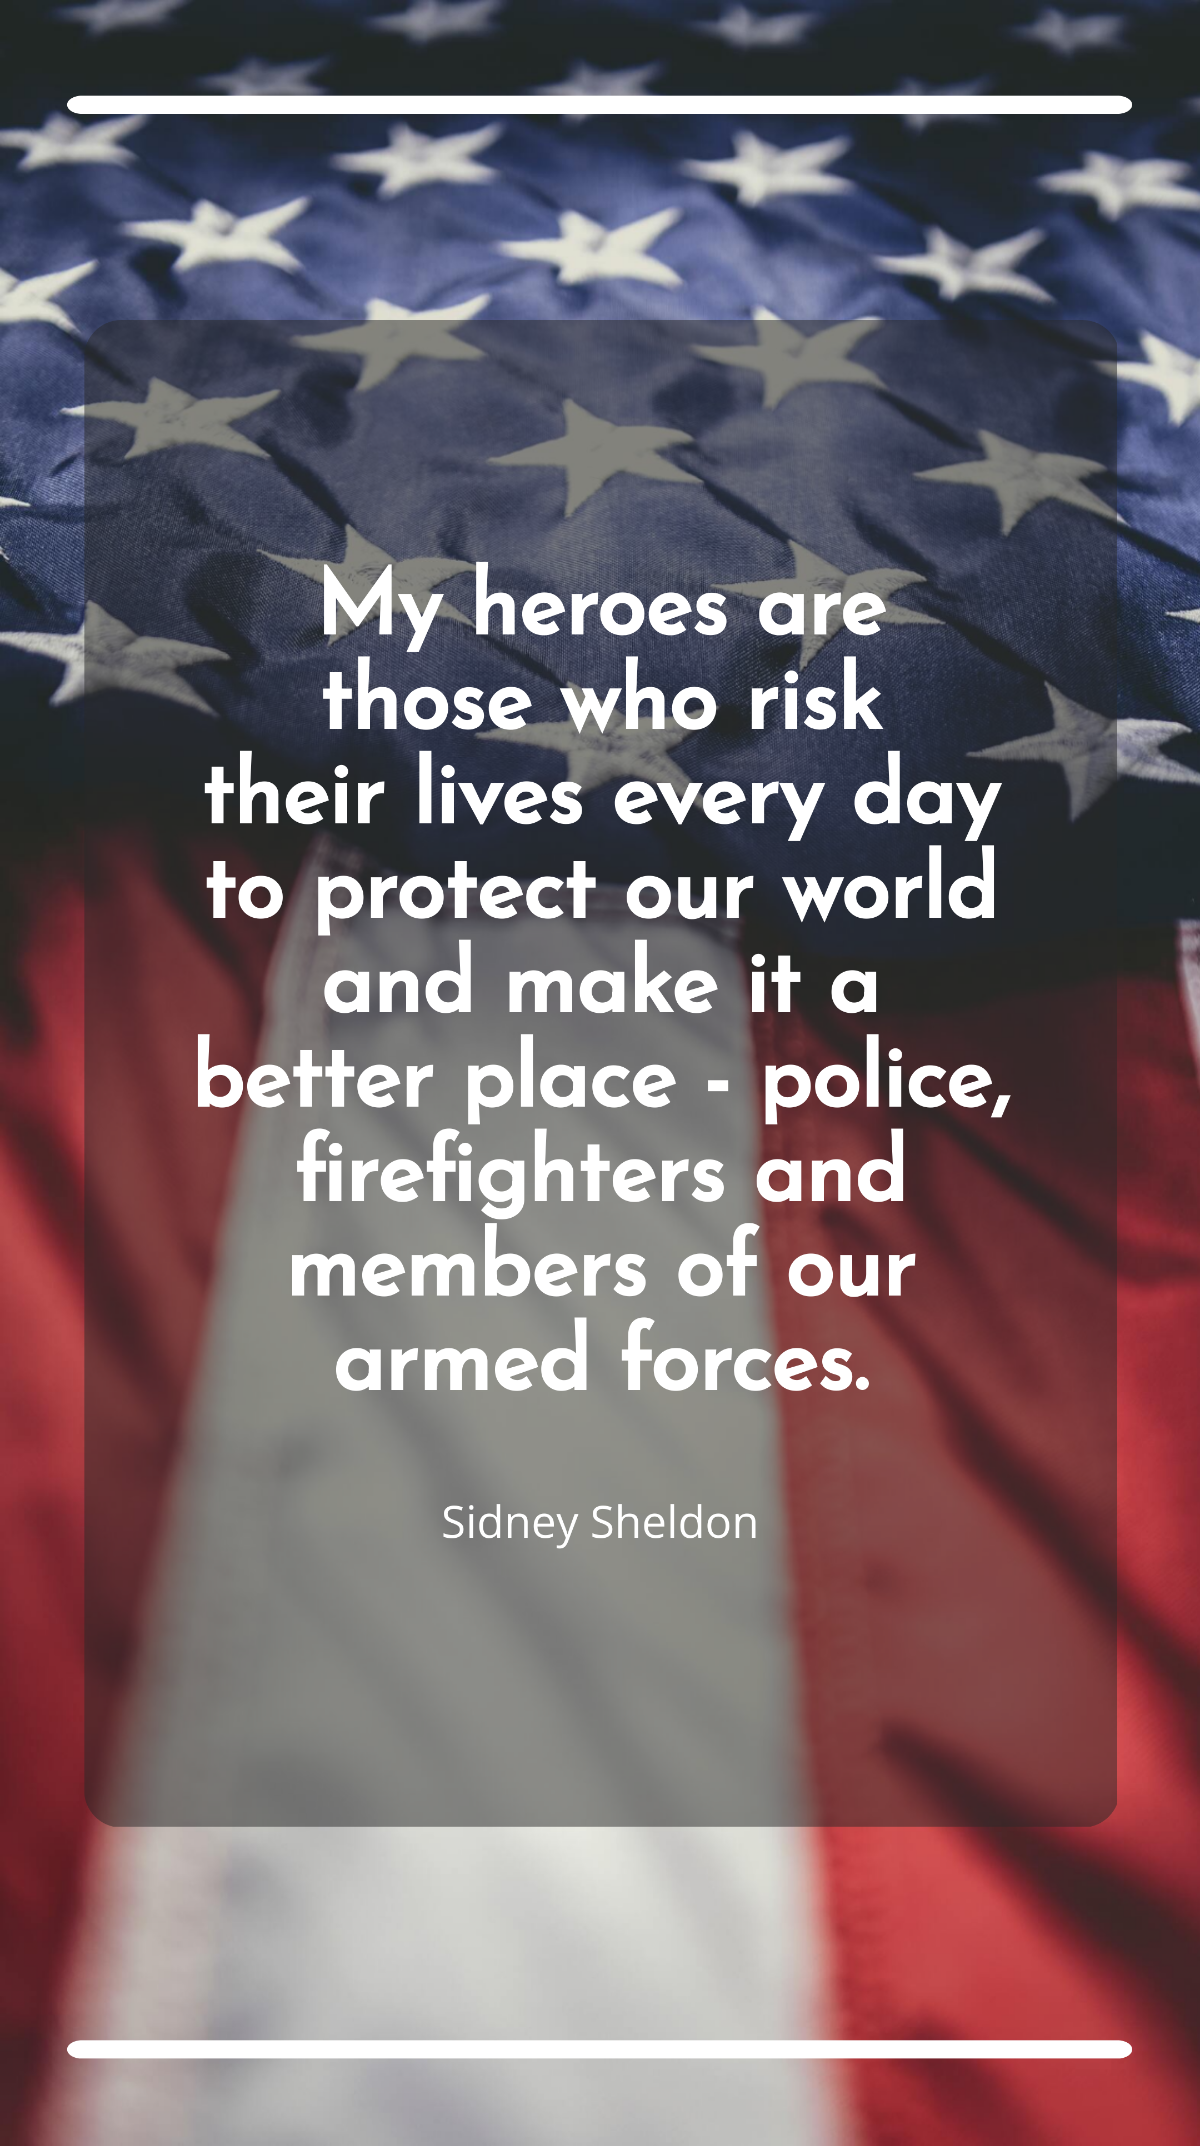 Sidney Sheldon - My heroes are those who risk their lives every day to protect our world and make it a better place - police, firefighters and members of our armed forces. Template